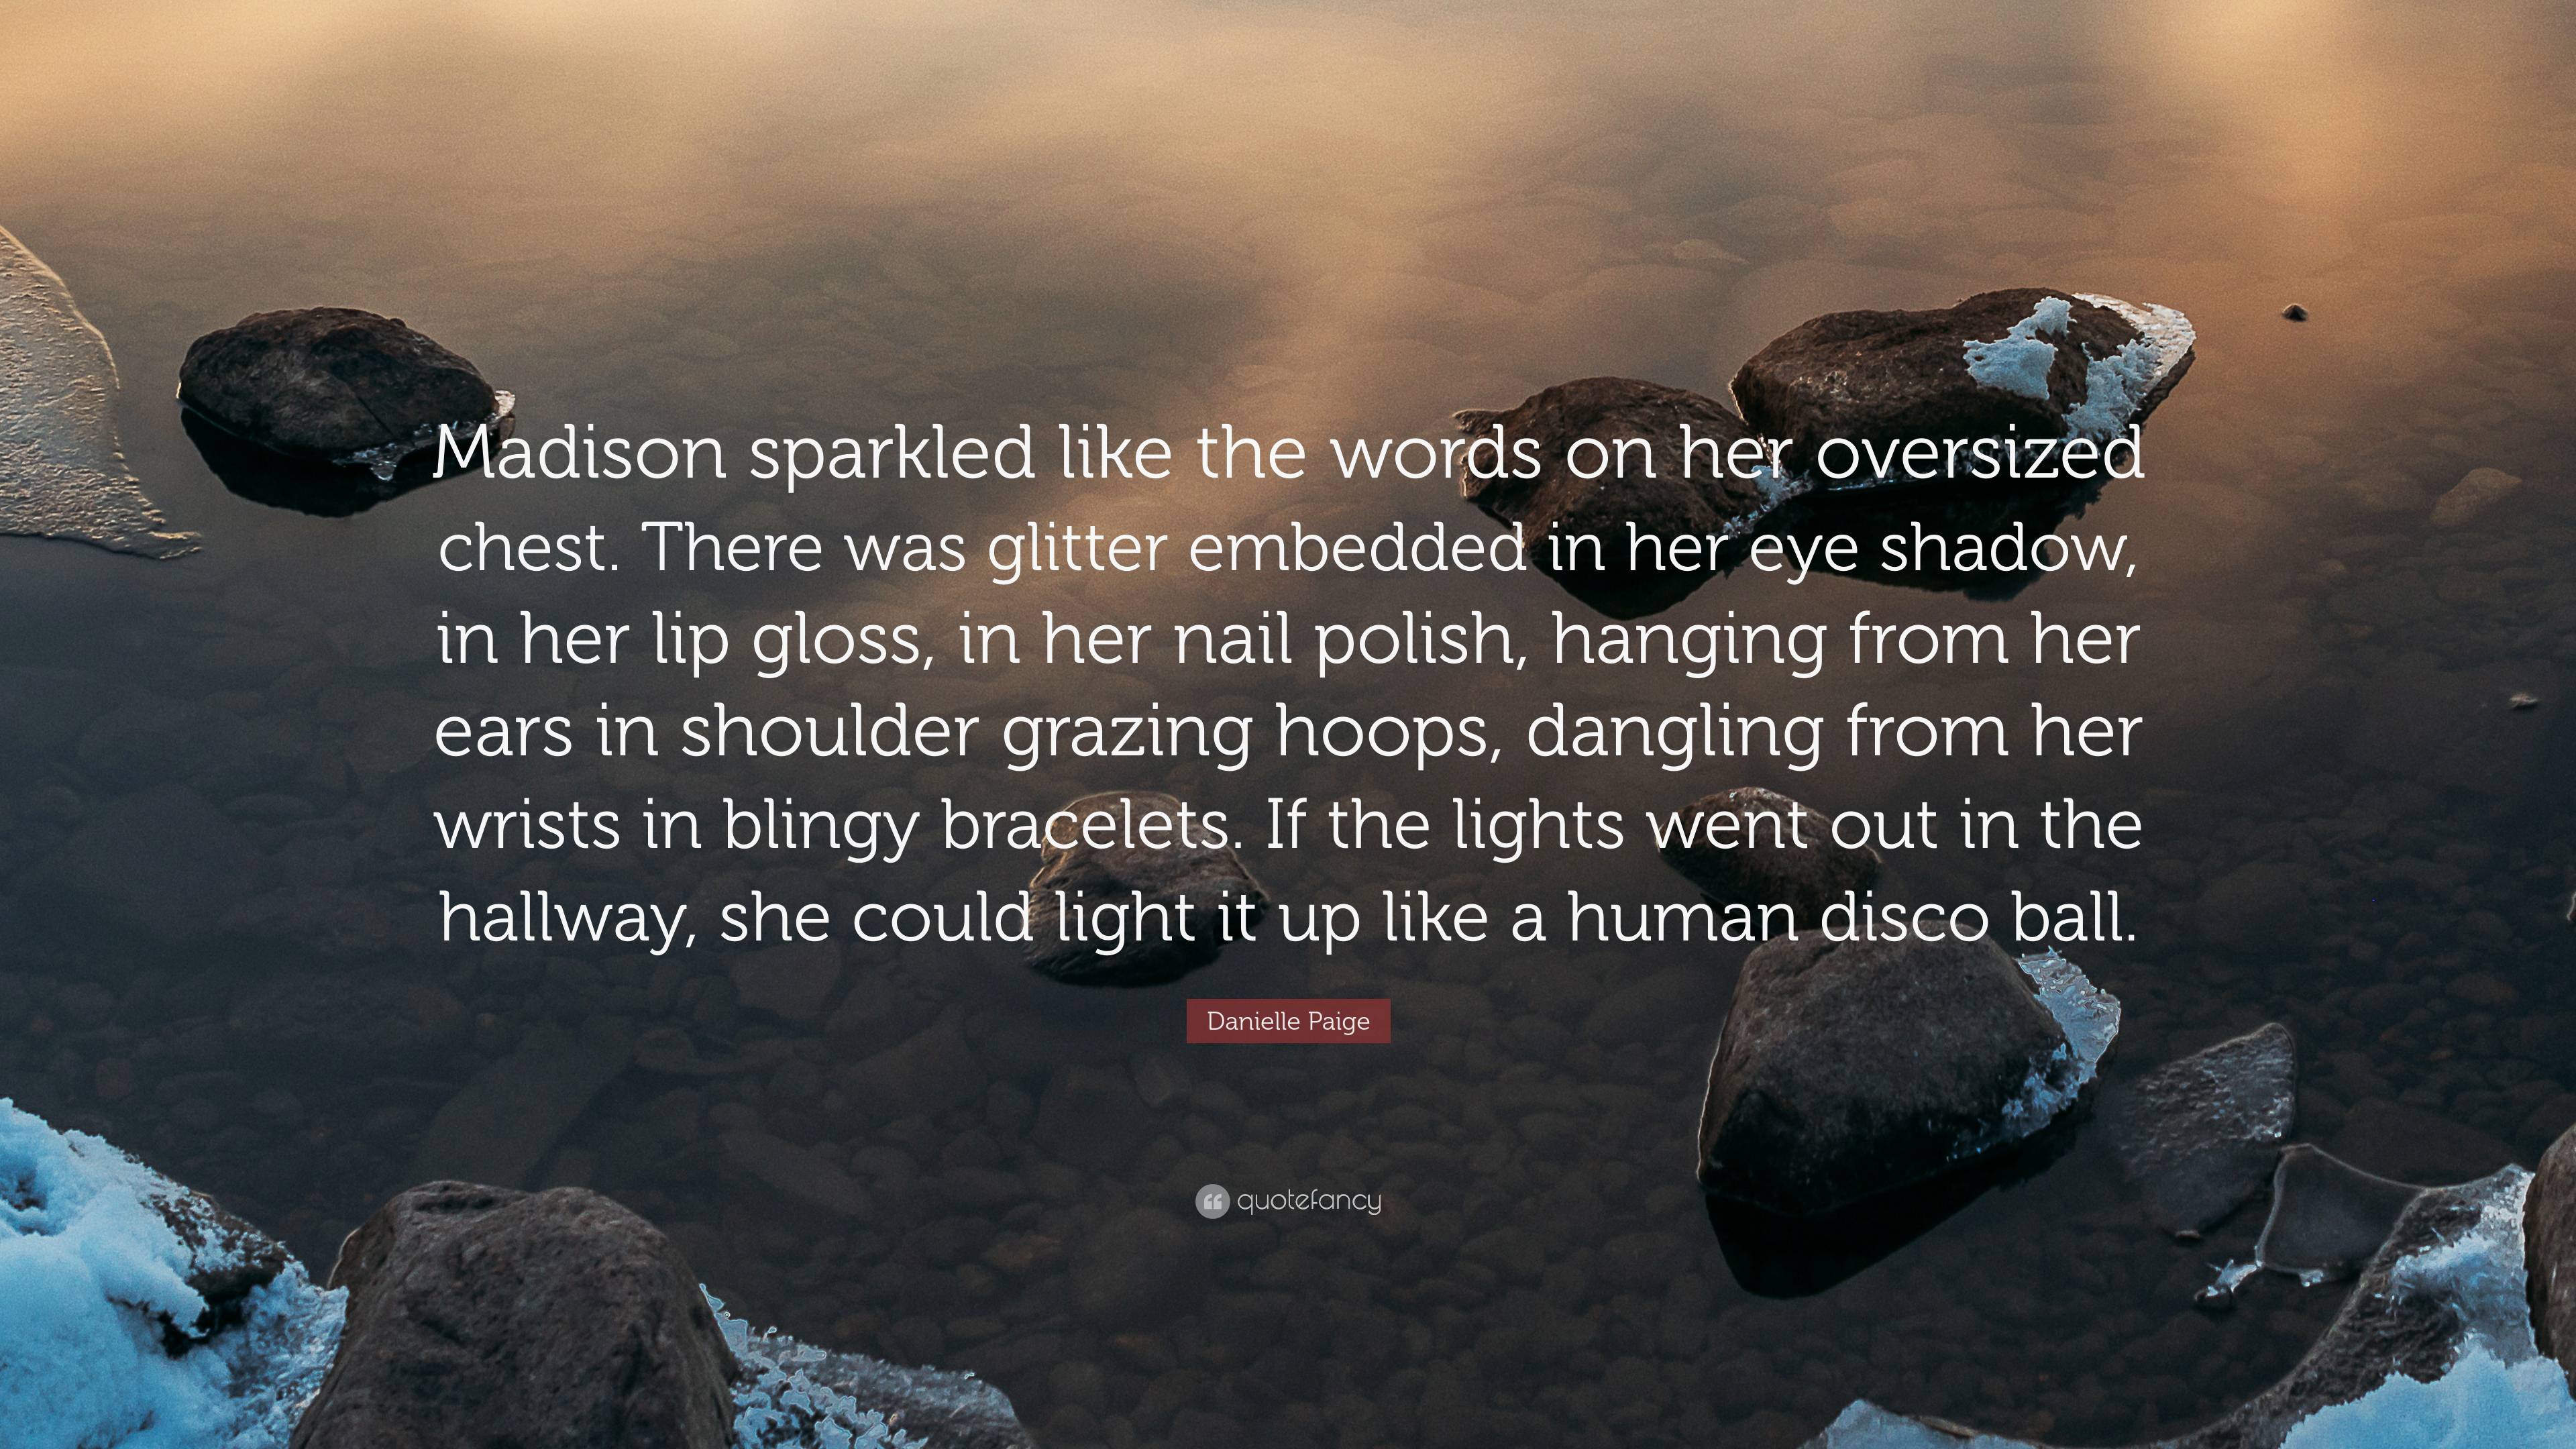 Danielle Paige Quote: “Madison sparkled like the words on her